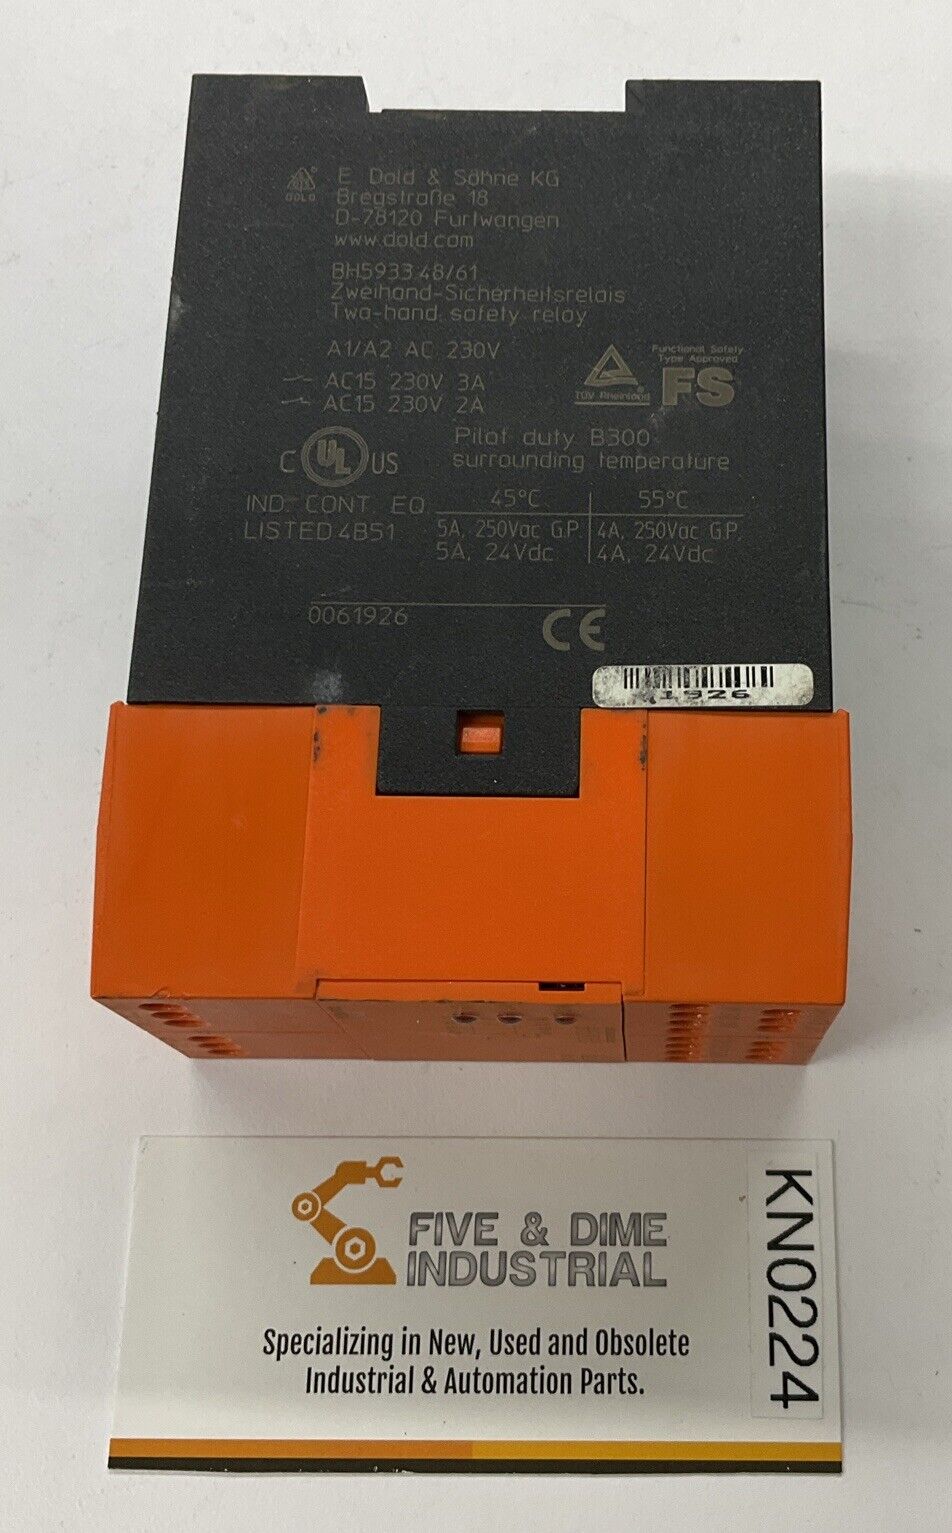 E. Dold & Sohne KG BH5933 D-78120 Safety Relay (BL106)